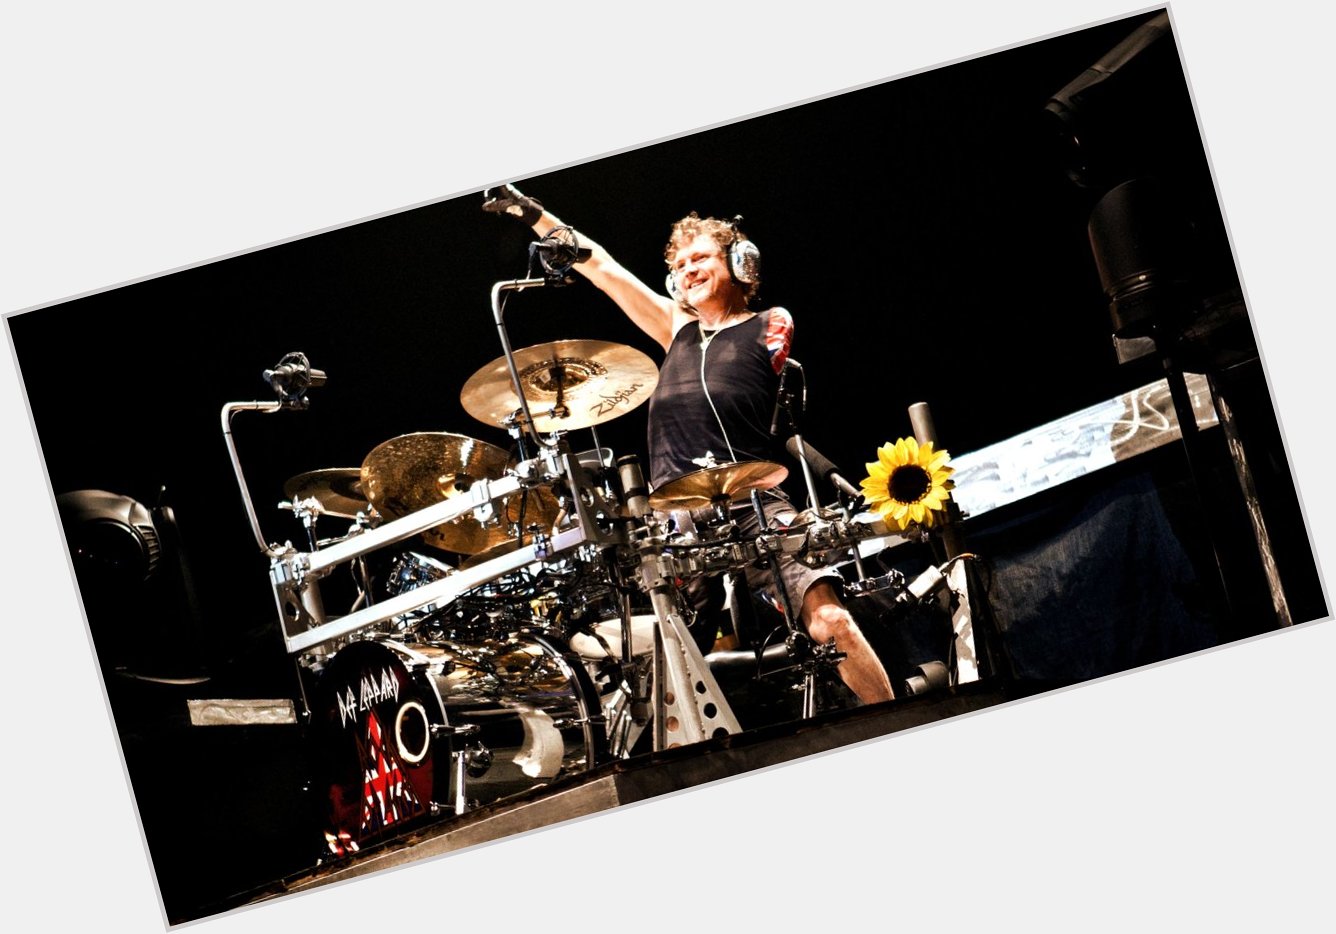  Pour Some Backbeat On Me  Happy Birthday Today 11/1 to Def Leppard drummer Rick Allen.  Rock ON! 